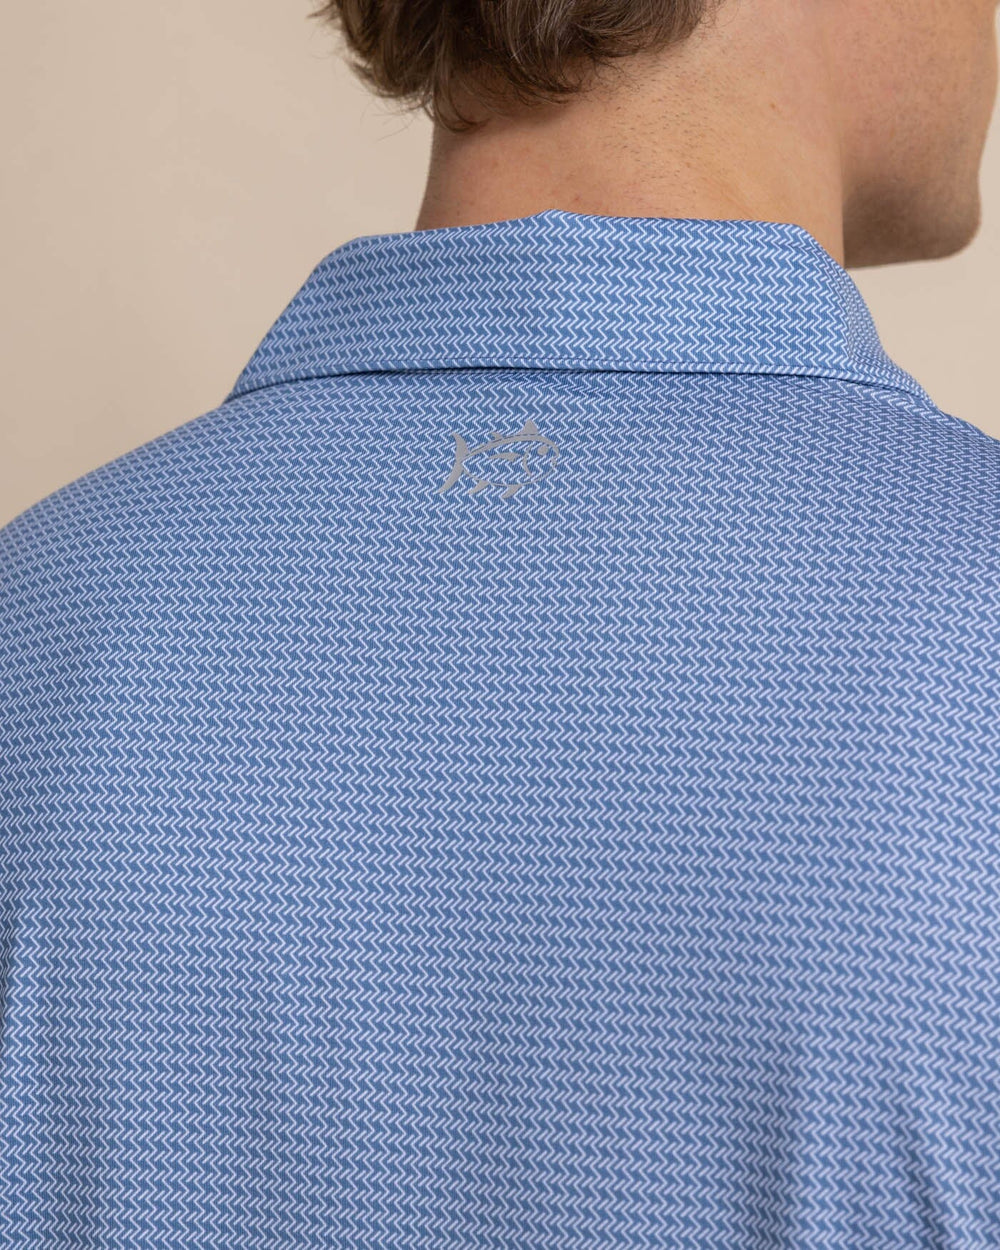 The detail view of the Southern Tide Driver Getting Ziggy With It Printed Polo by Southern Tide - Coronet Blue